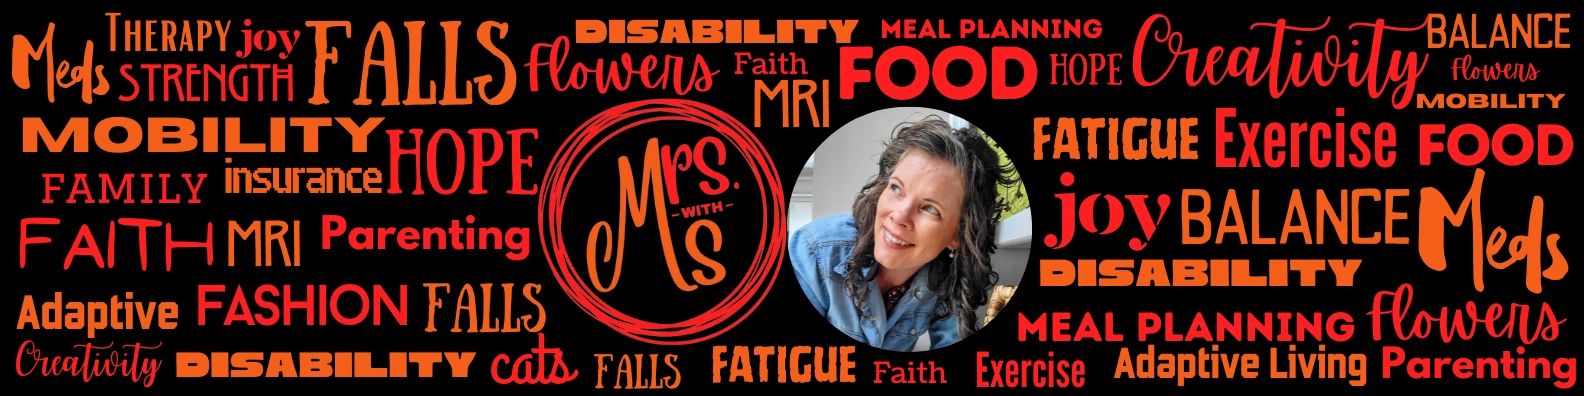 Mrs. with MS describes Multiple Sclerosis as a chronic illness causing falls, fatigue & imbalance. 